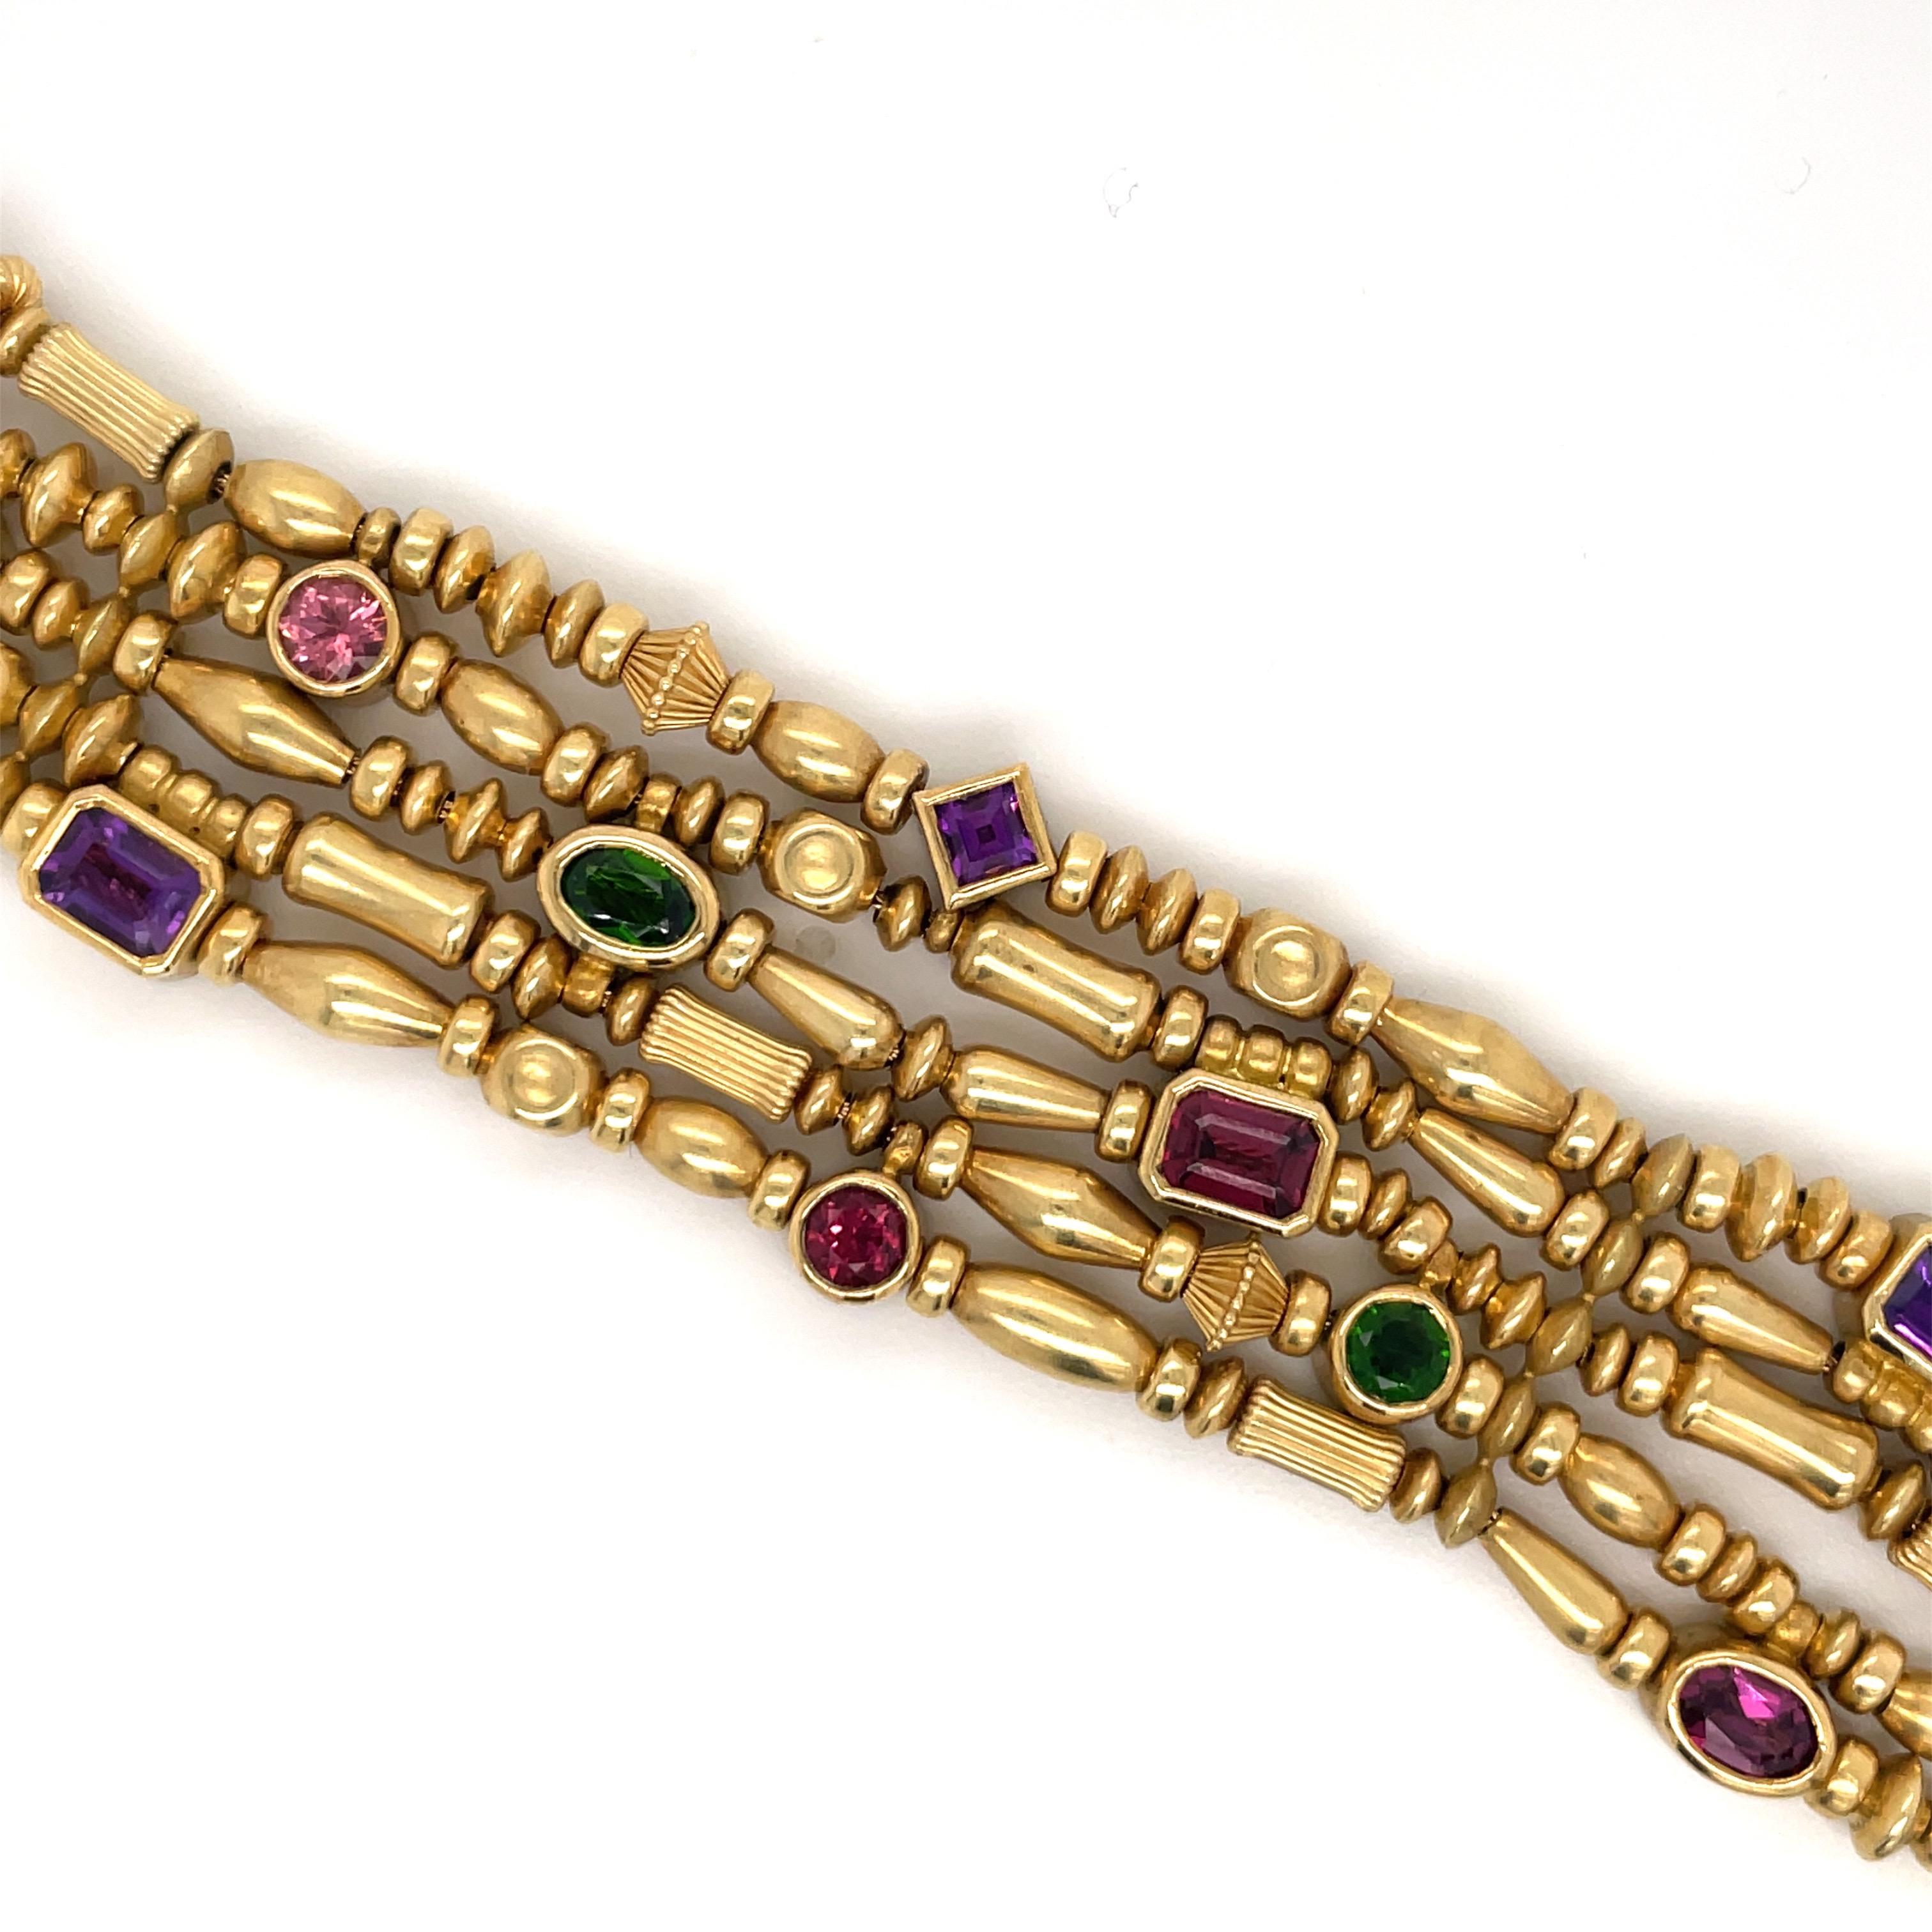 SEIDENGANG five row beaded bracelet featuring multi color gemstones of emerald, garnet, amethyst and Tourmaline stones crafted in 18K yellow gold, 71.8 Grams.
Stamped SG 750